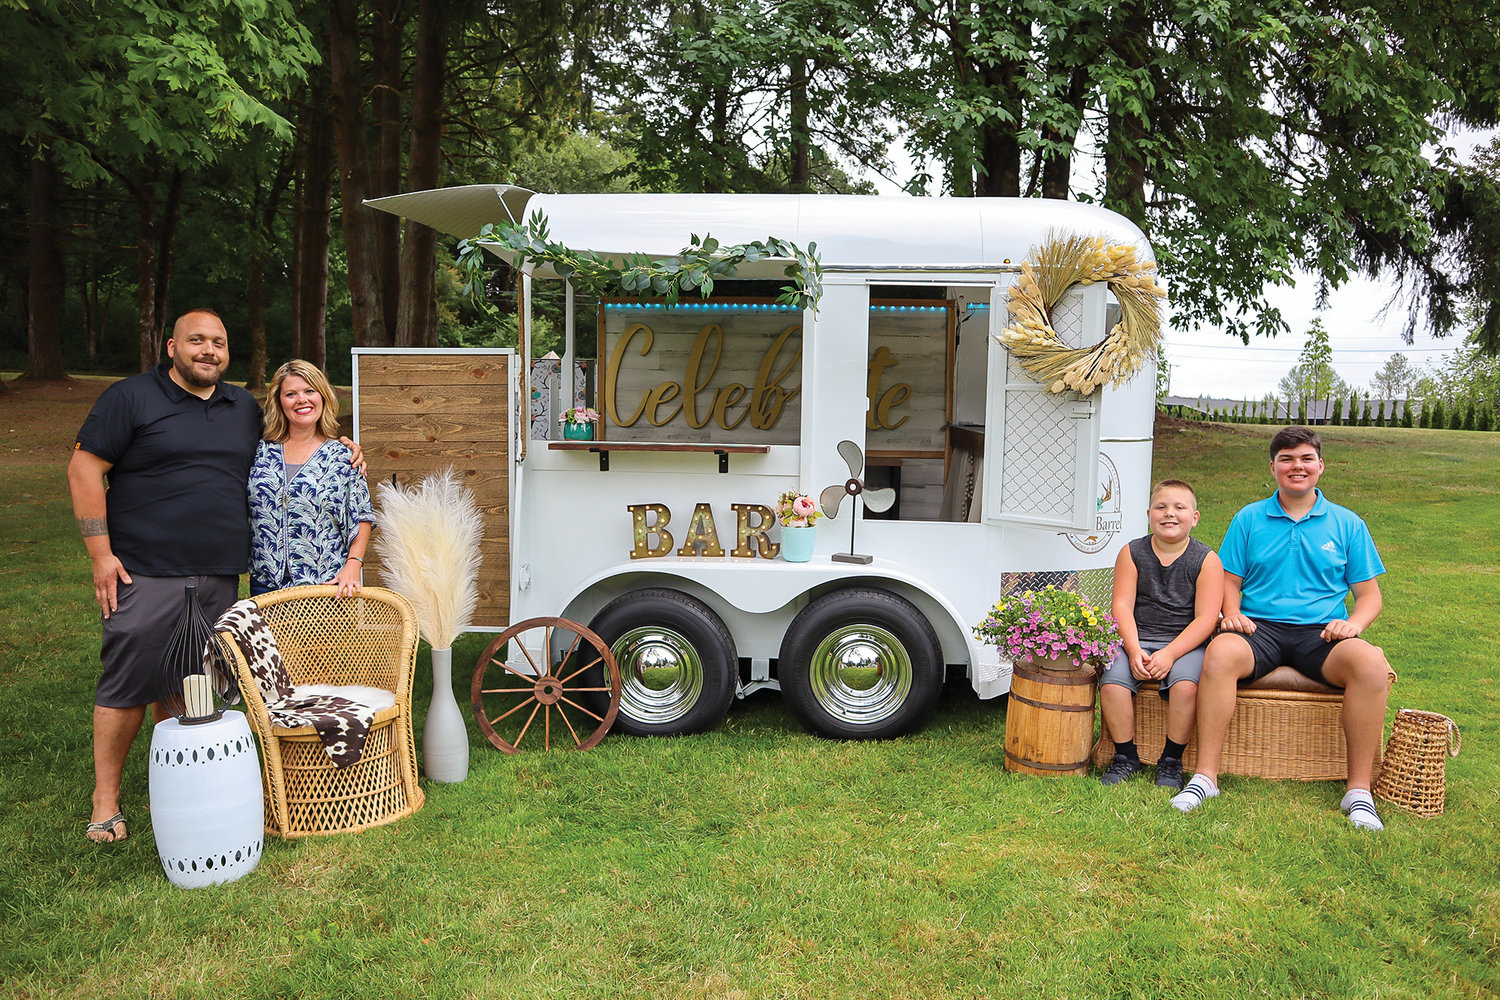 Erin Musgrove and her family sit in front of their mobile bar, which offers bartending services at events